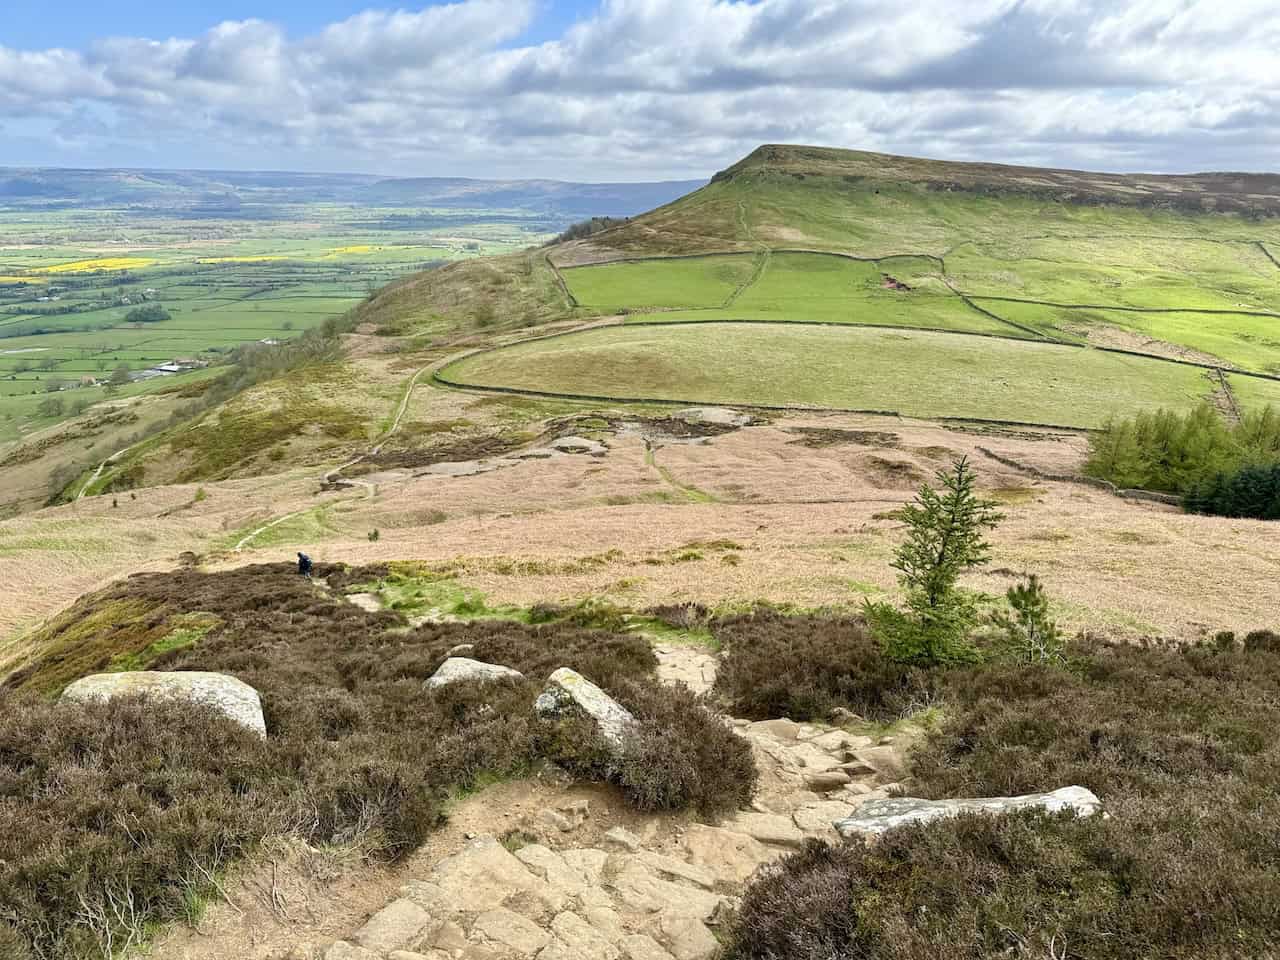 The view back to Cold Moor as we climb the steps up Kirby Bank to reach the summit of Cringle Moor.